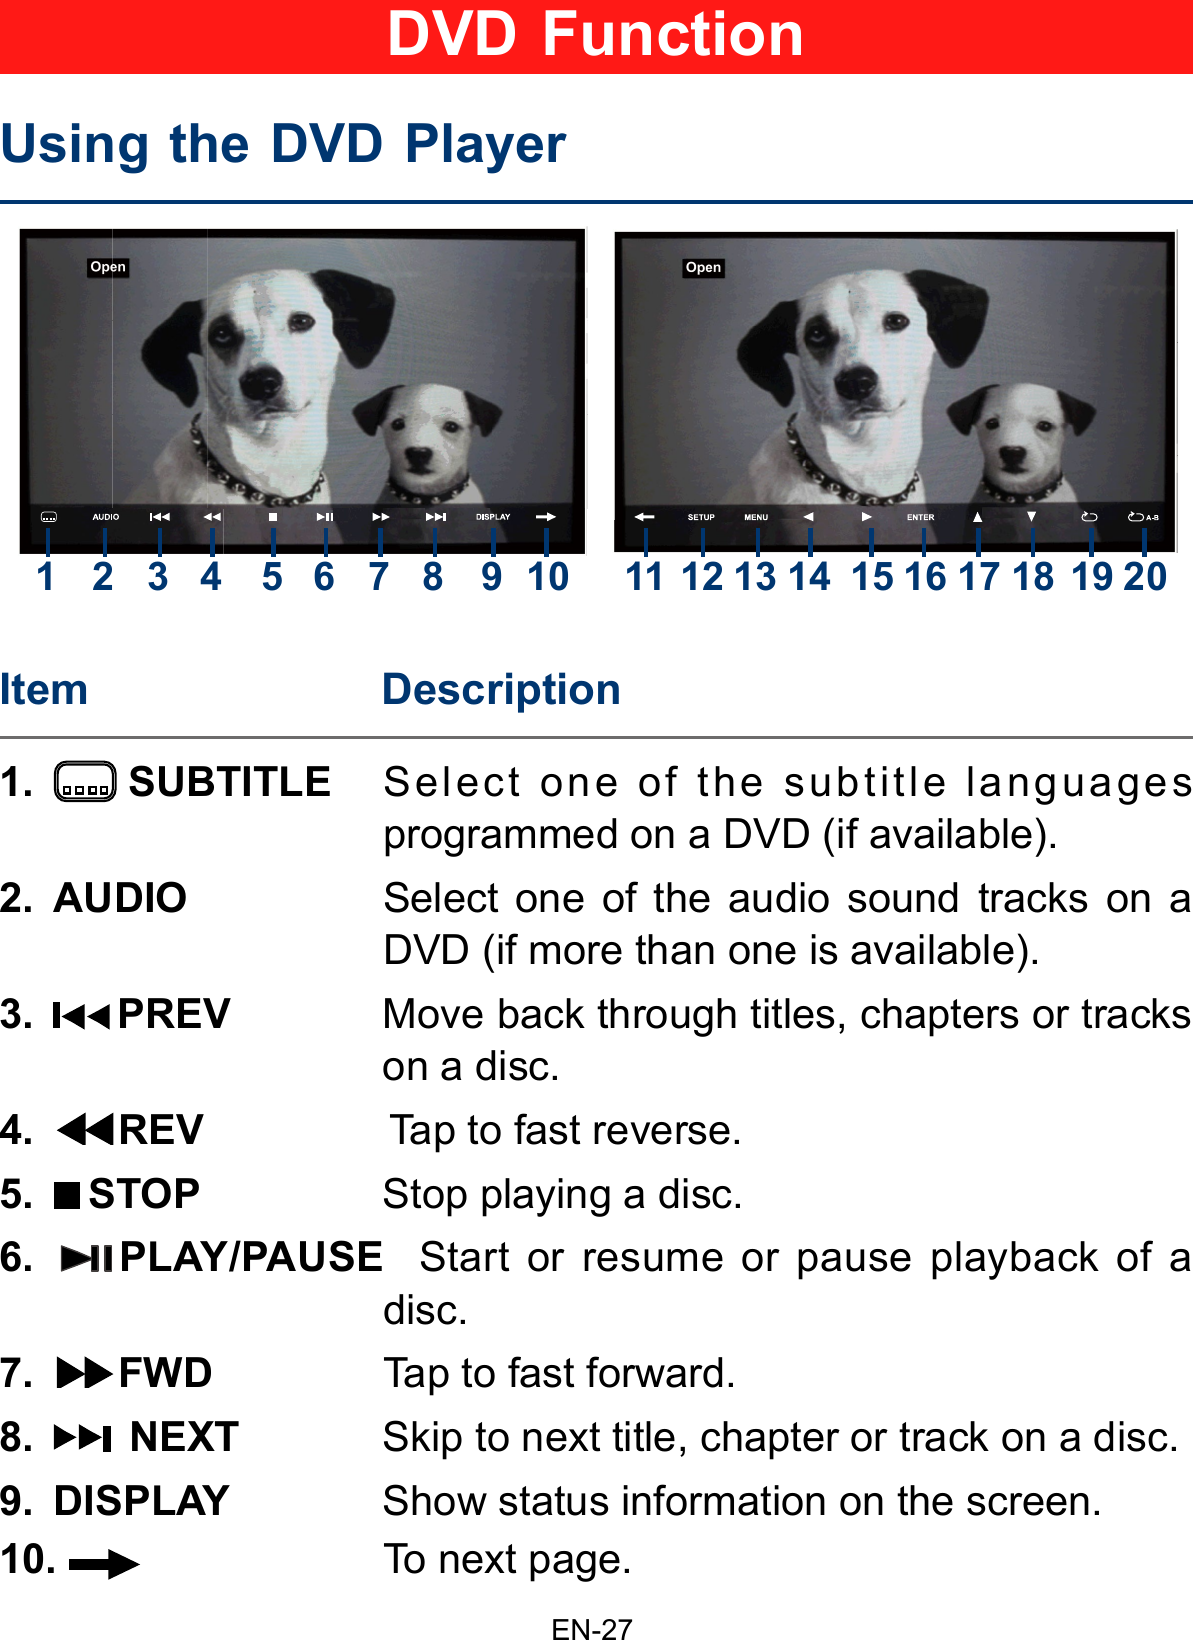                                                                     EN-27DVD FunctionUsing the DVD Player Item                        Description1.    SUBTITLE  Select one of the subtitle languages programmed on a DVD (if available).2.  AUDIO         Select one of the audio sound tracks on a DVD (if more than one is available).3. PREV  Move back through titles, chapters or tracks on a disc.4.   REV                Tap to fast reverse.5. STOP  Stop playing a disc.6.  PLAY/PAUSE  Start or resume or pause playback of a disc.7.   FWD               Tap to fast forward.8.   NEXT   Skip to next title, chapter or track on a disc.9.  DISPLAY             Show status information on the screen.10.                To next page.1 2 3 4 5 6 7 8 9 10 11 12 13 14 15 16 17 18 19 20 